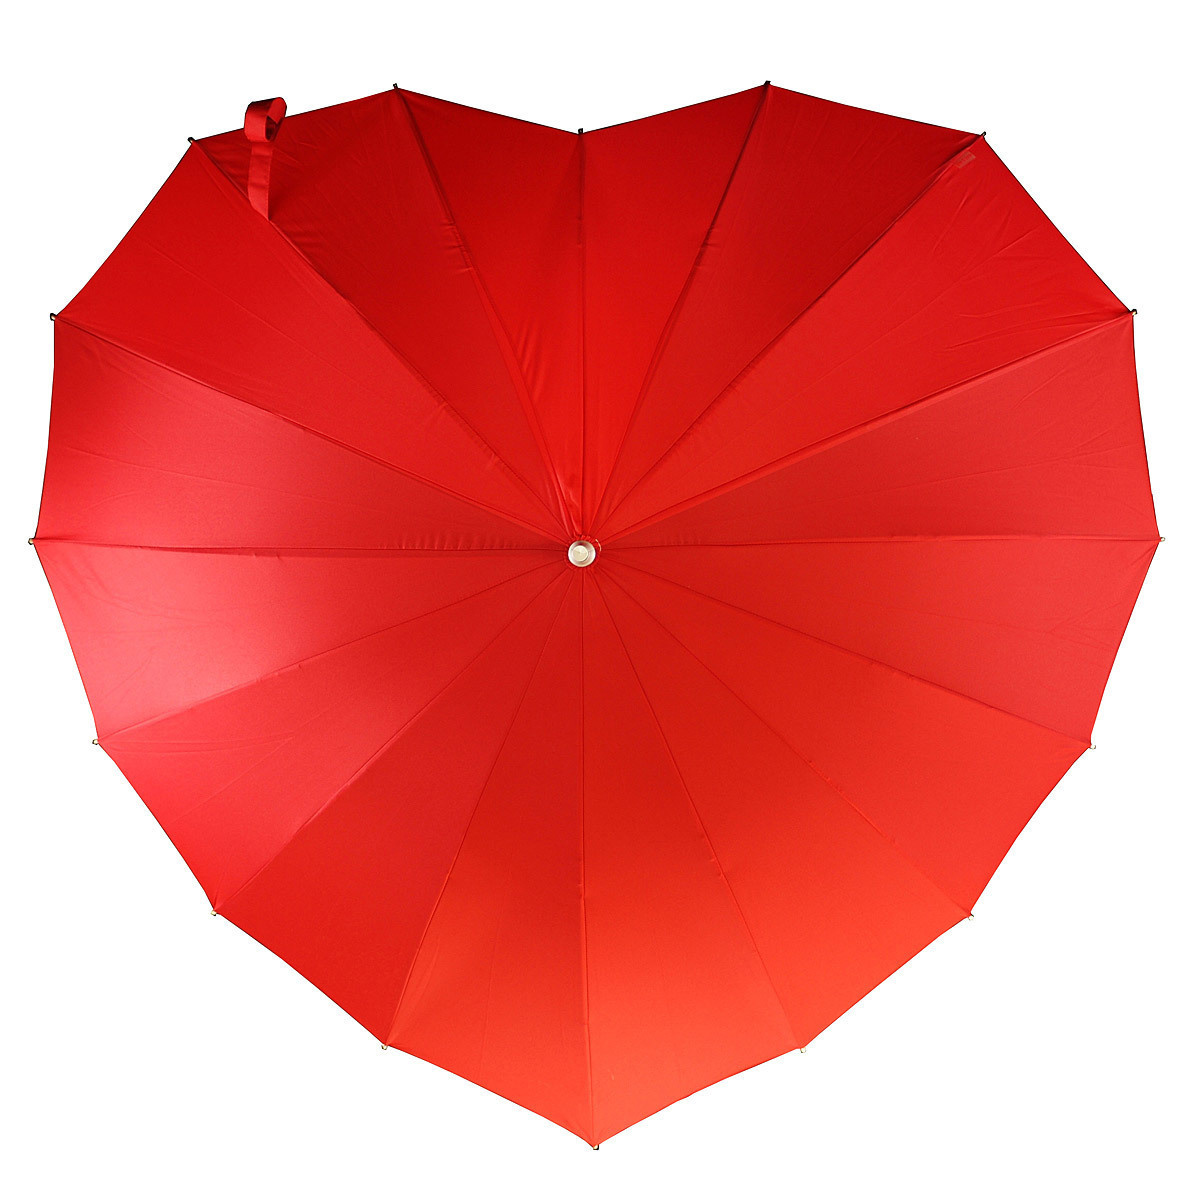 The Crimson Heart Umbrella hits two birds, useful and adorable, with one stone!